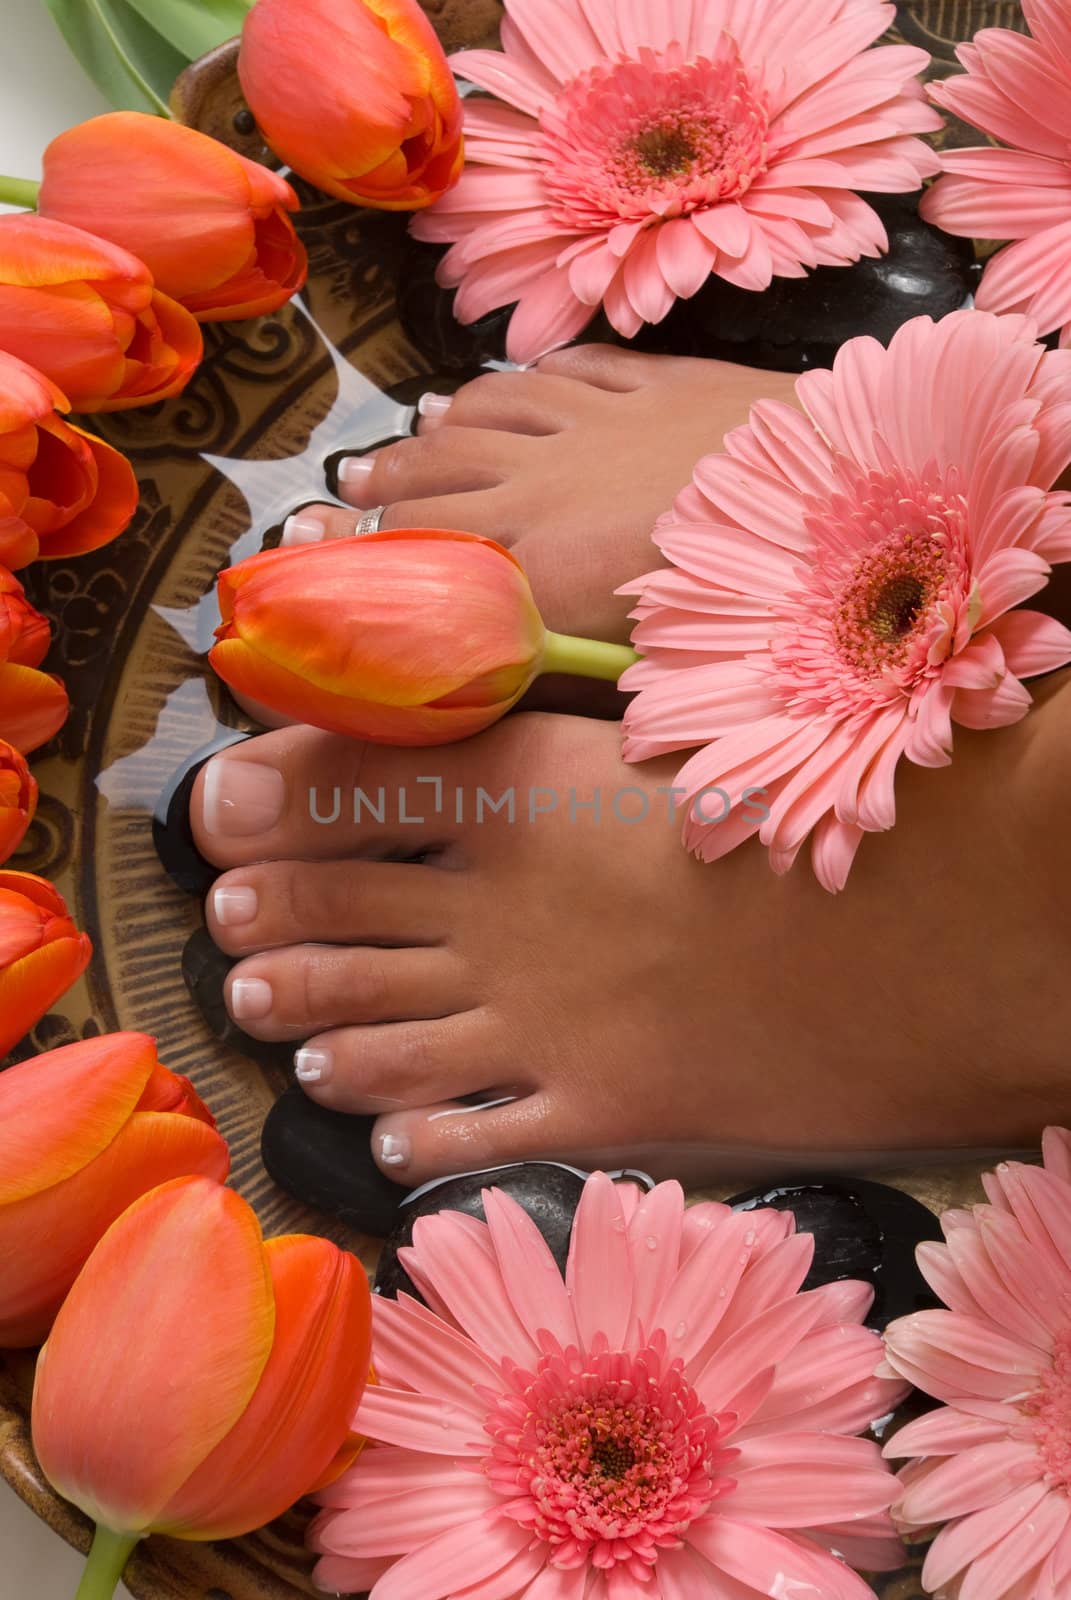 Spa treatment with beautiful elegant tulips and gerberas

